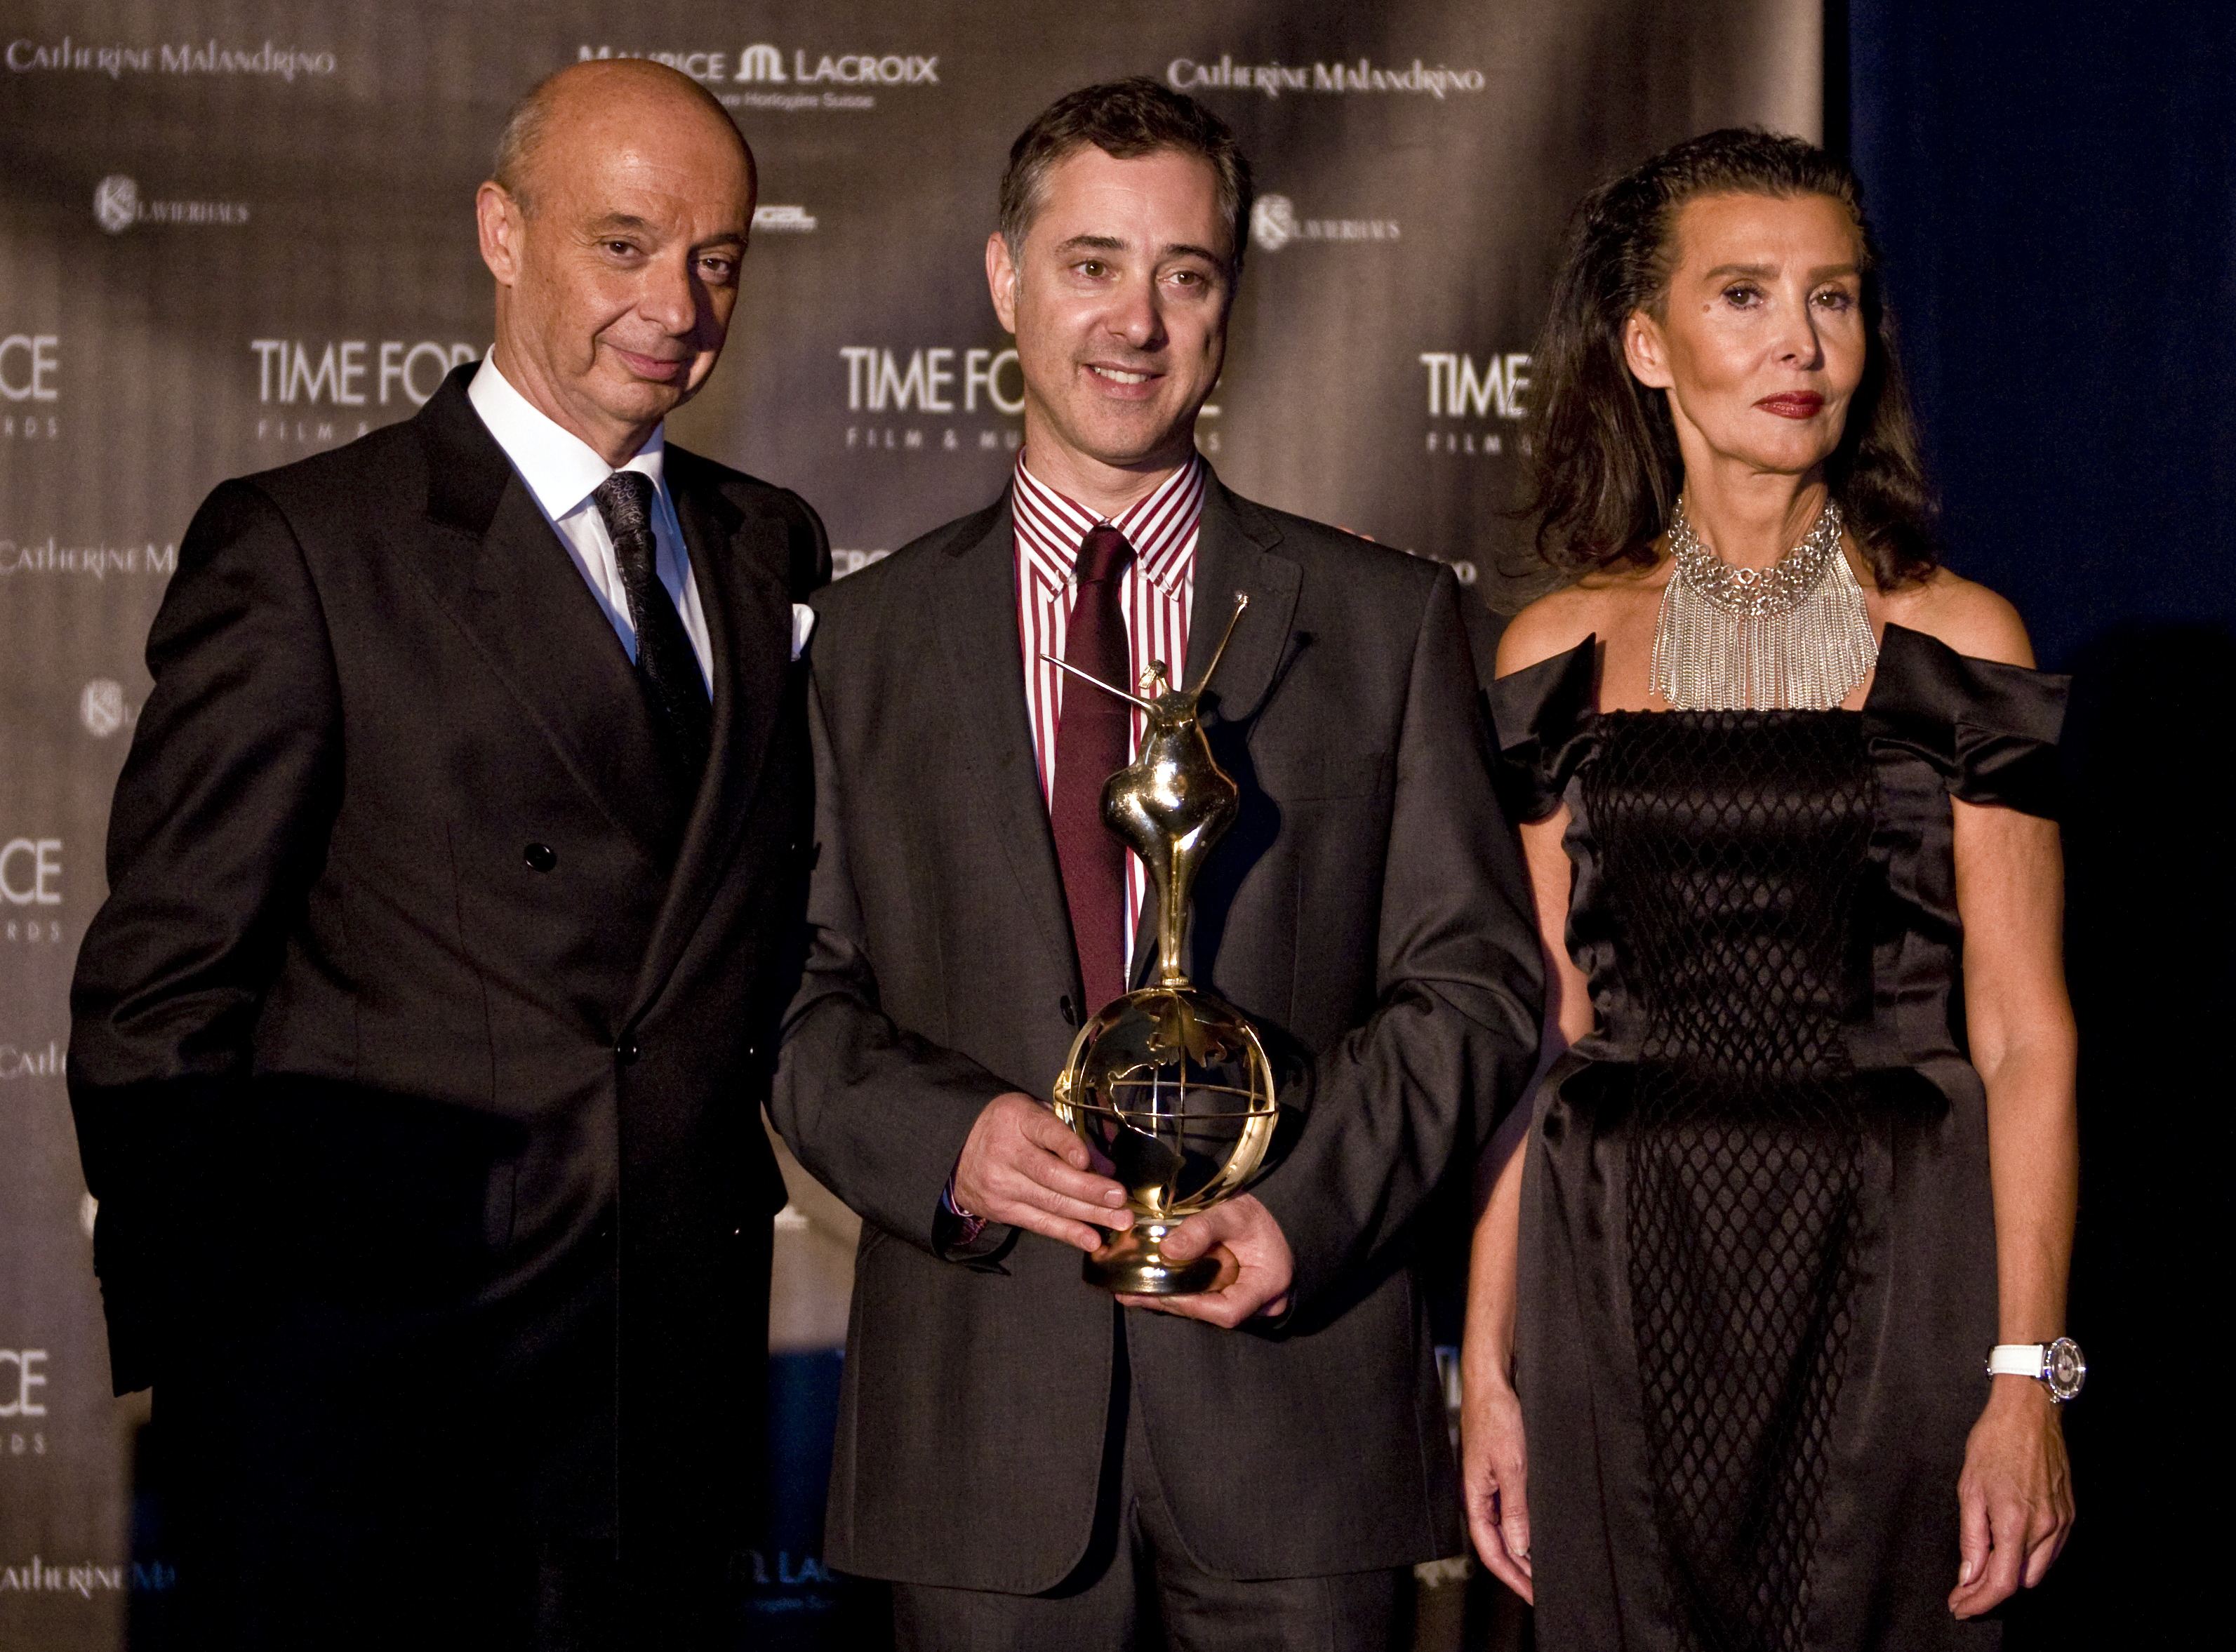 Robert Einbeck, Founder of the Time for Peace Awards, Anthony Fabian and Marion Einbeck (co-founder) attend the ceremony at the Essex Hotel, New York, 28 October 2009